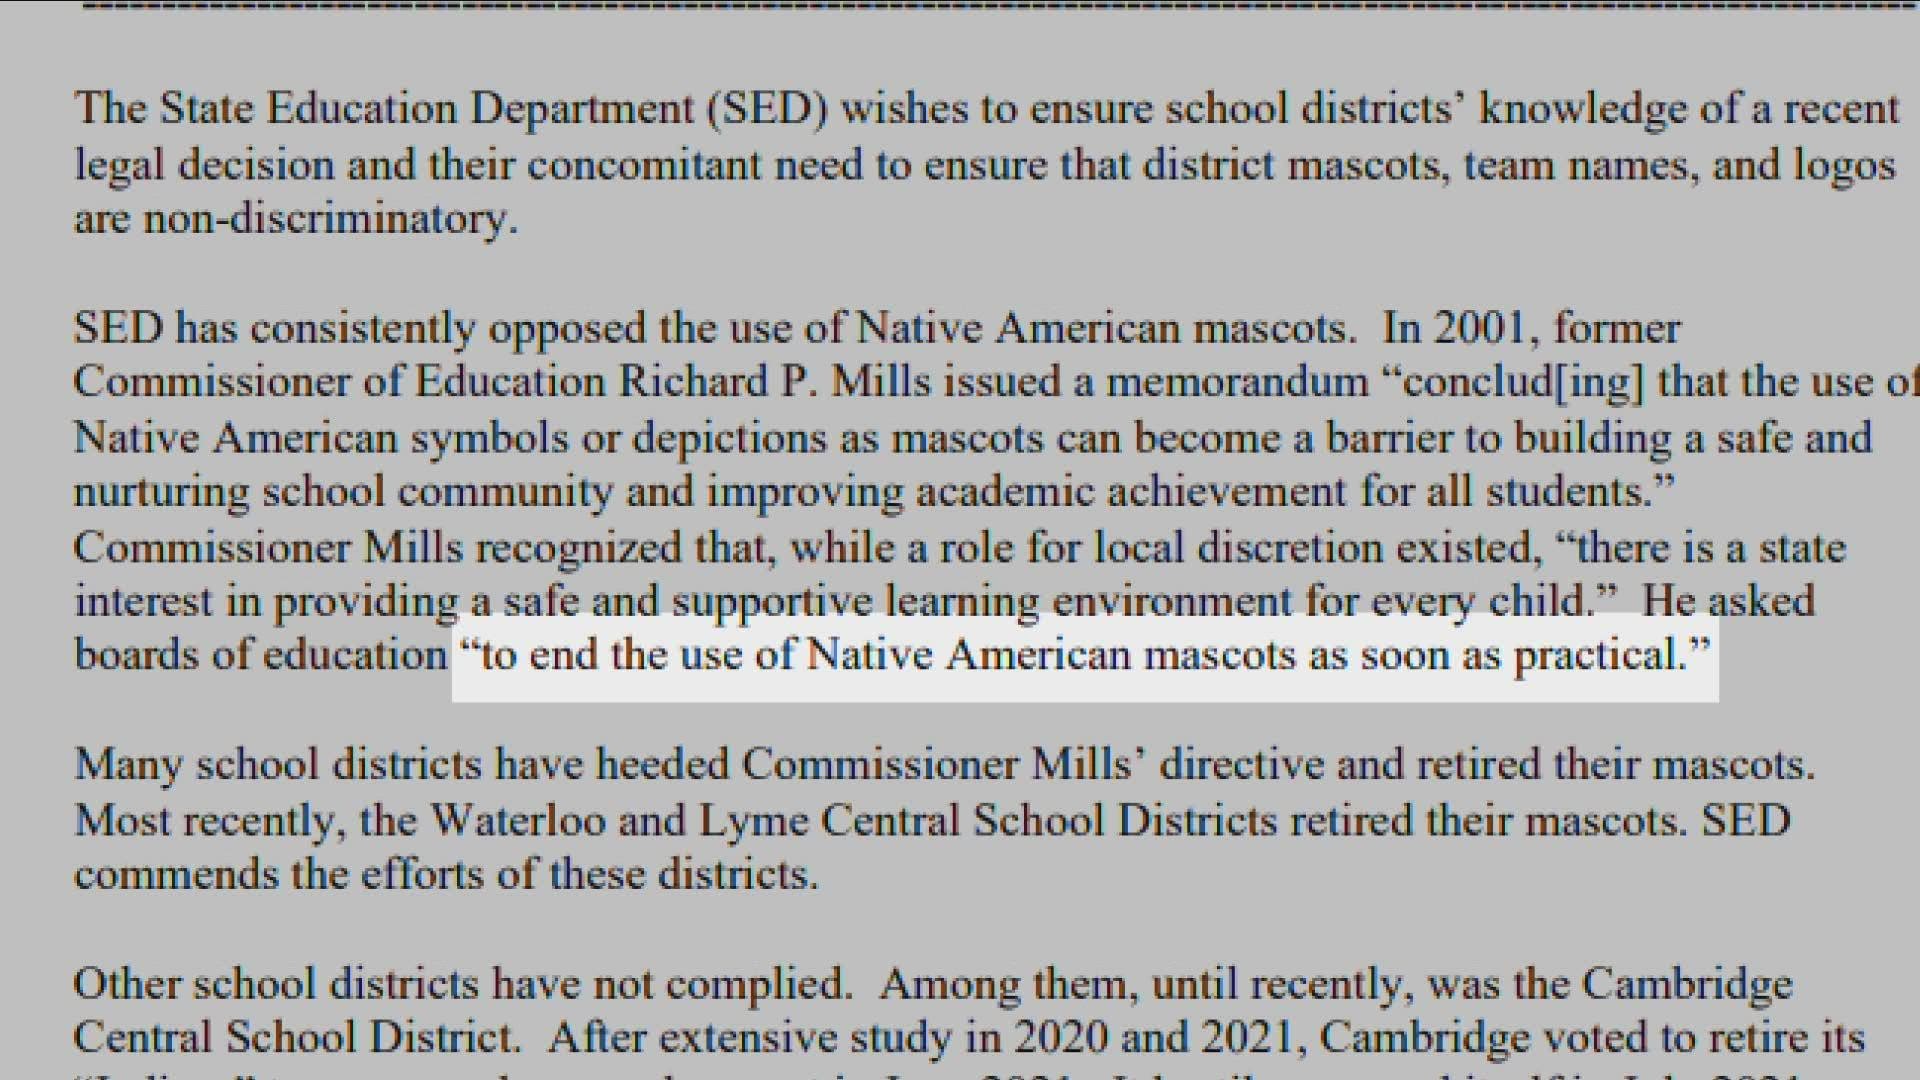 New York State Education: Schools must drop Native American mascots and logos